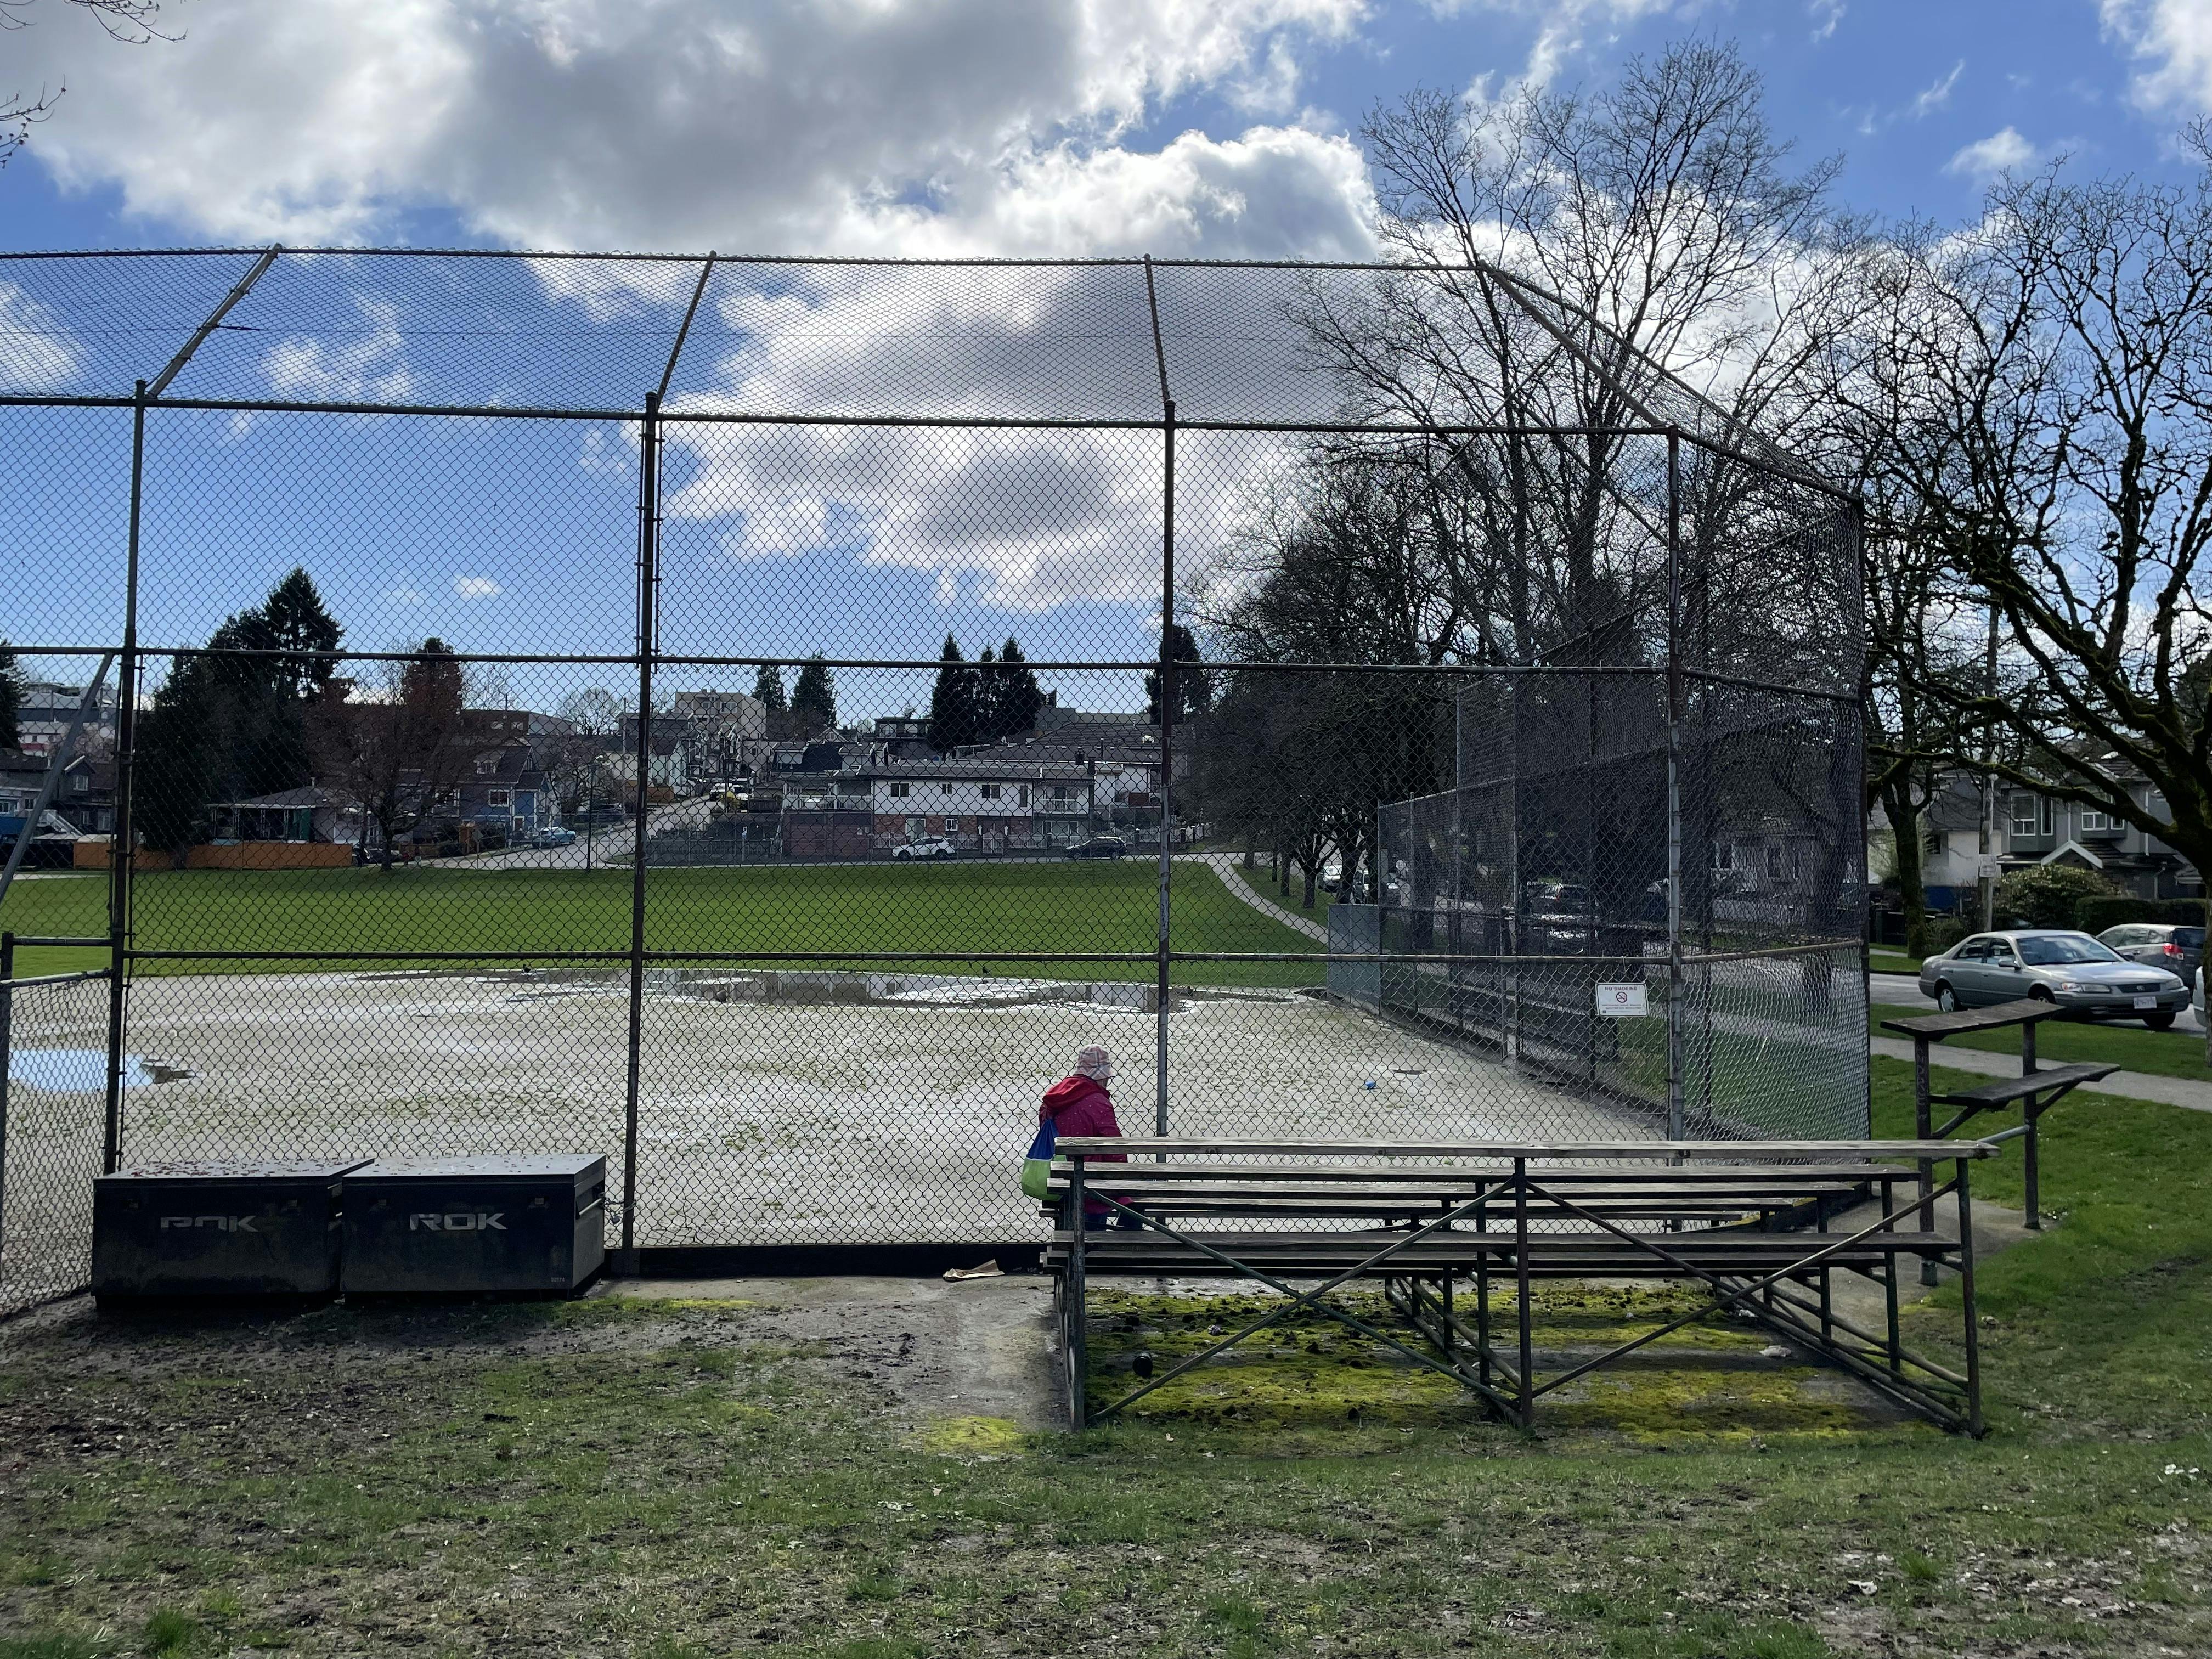 Collingwood Park - existing baseball diamond and bleachers conditions